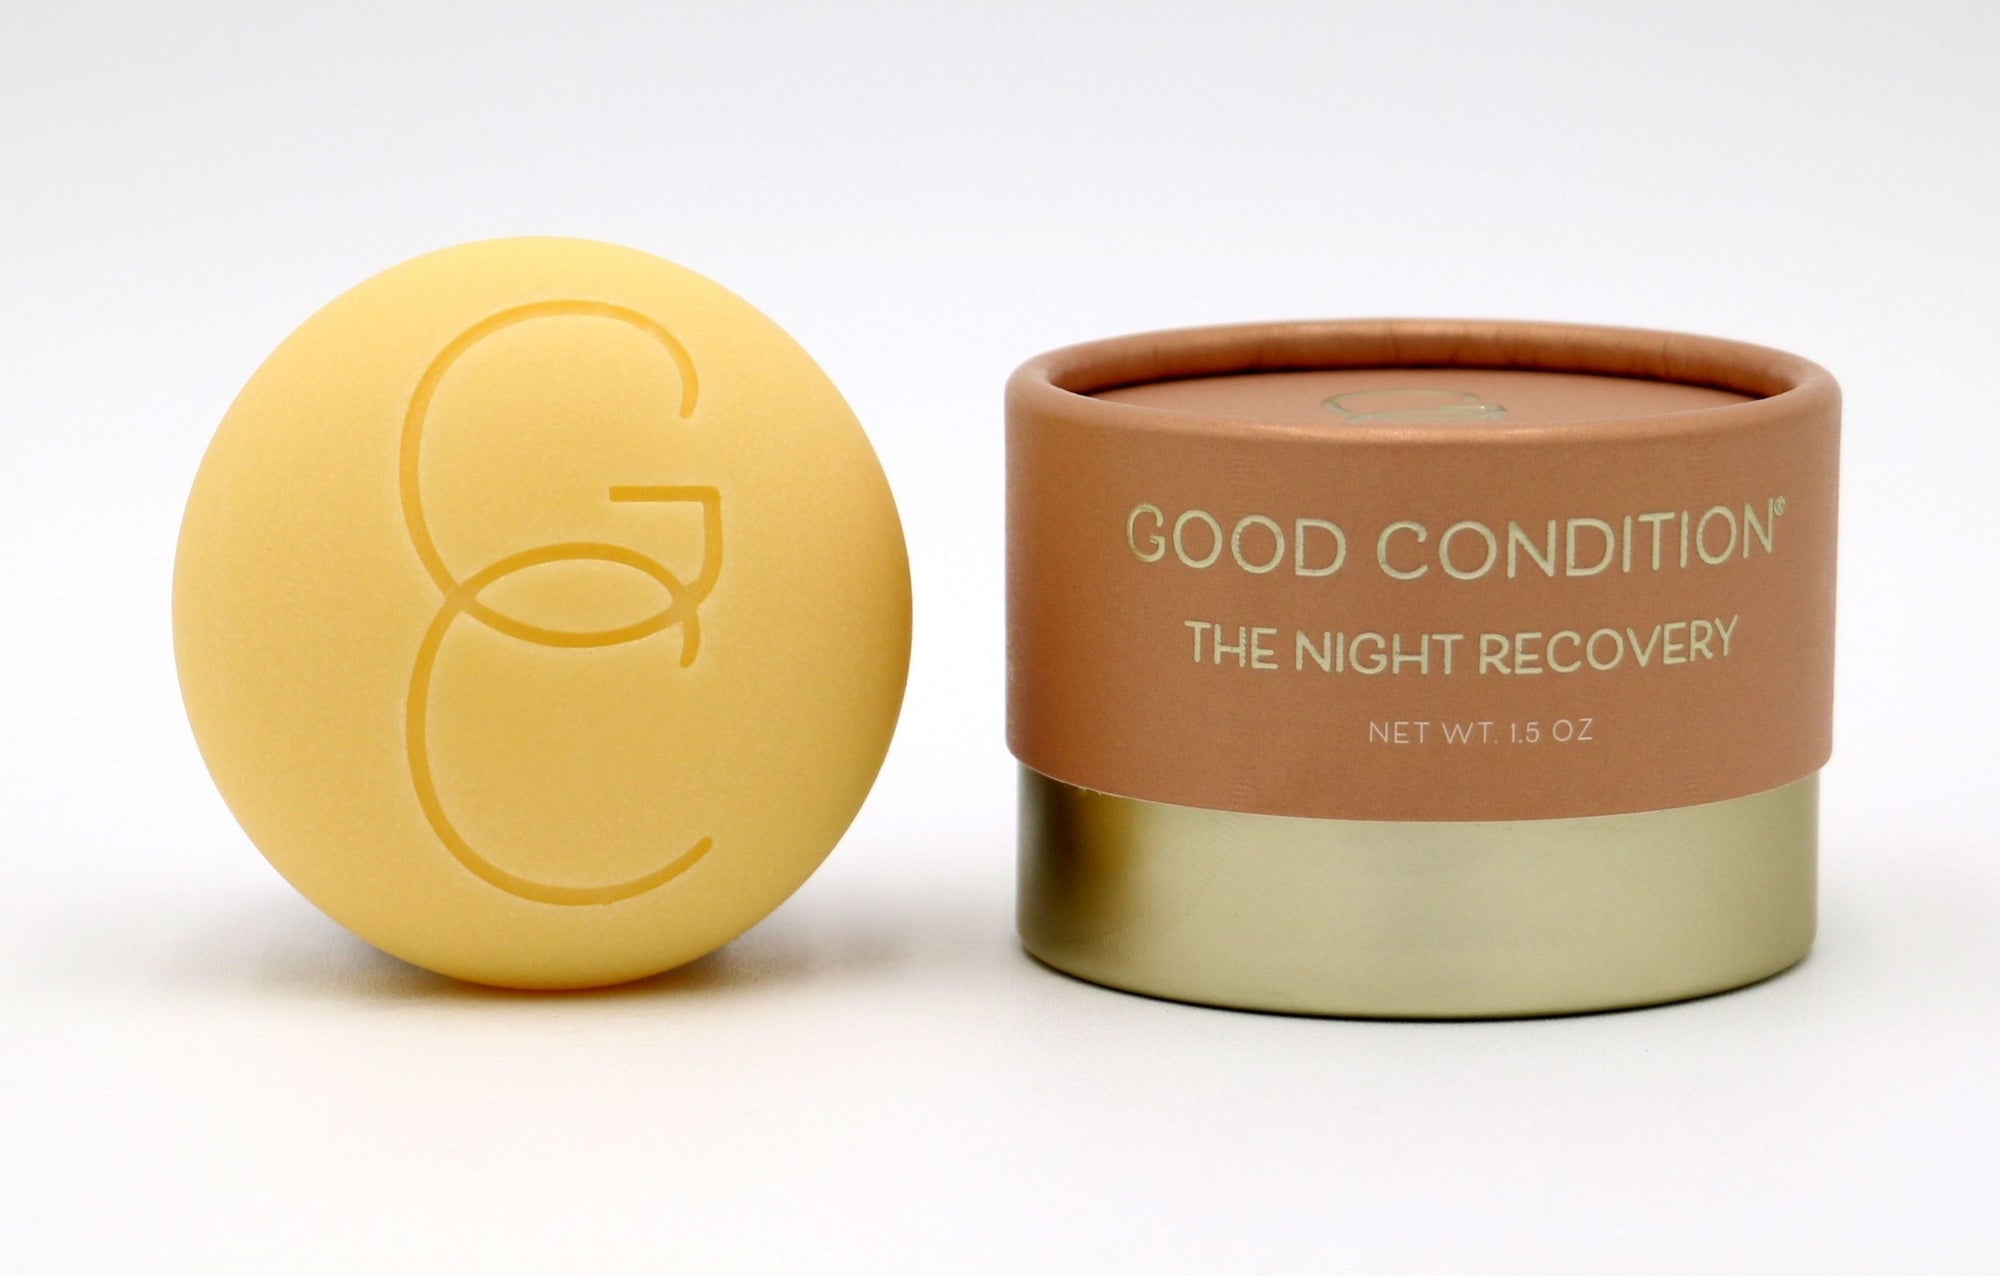 Good Condition The Night Recovery organic kokum butter intense facial moisturizer. Made with goji seed oil to help firm, sea buckthorn oil to reduce redness, inflammation, and premature signs of aging. Bakuchi oil and squalene stimulate collagen and address roughness and dryness, fine lines, and wrinkles. 